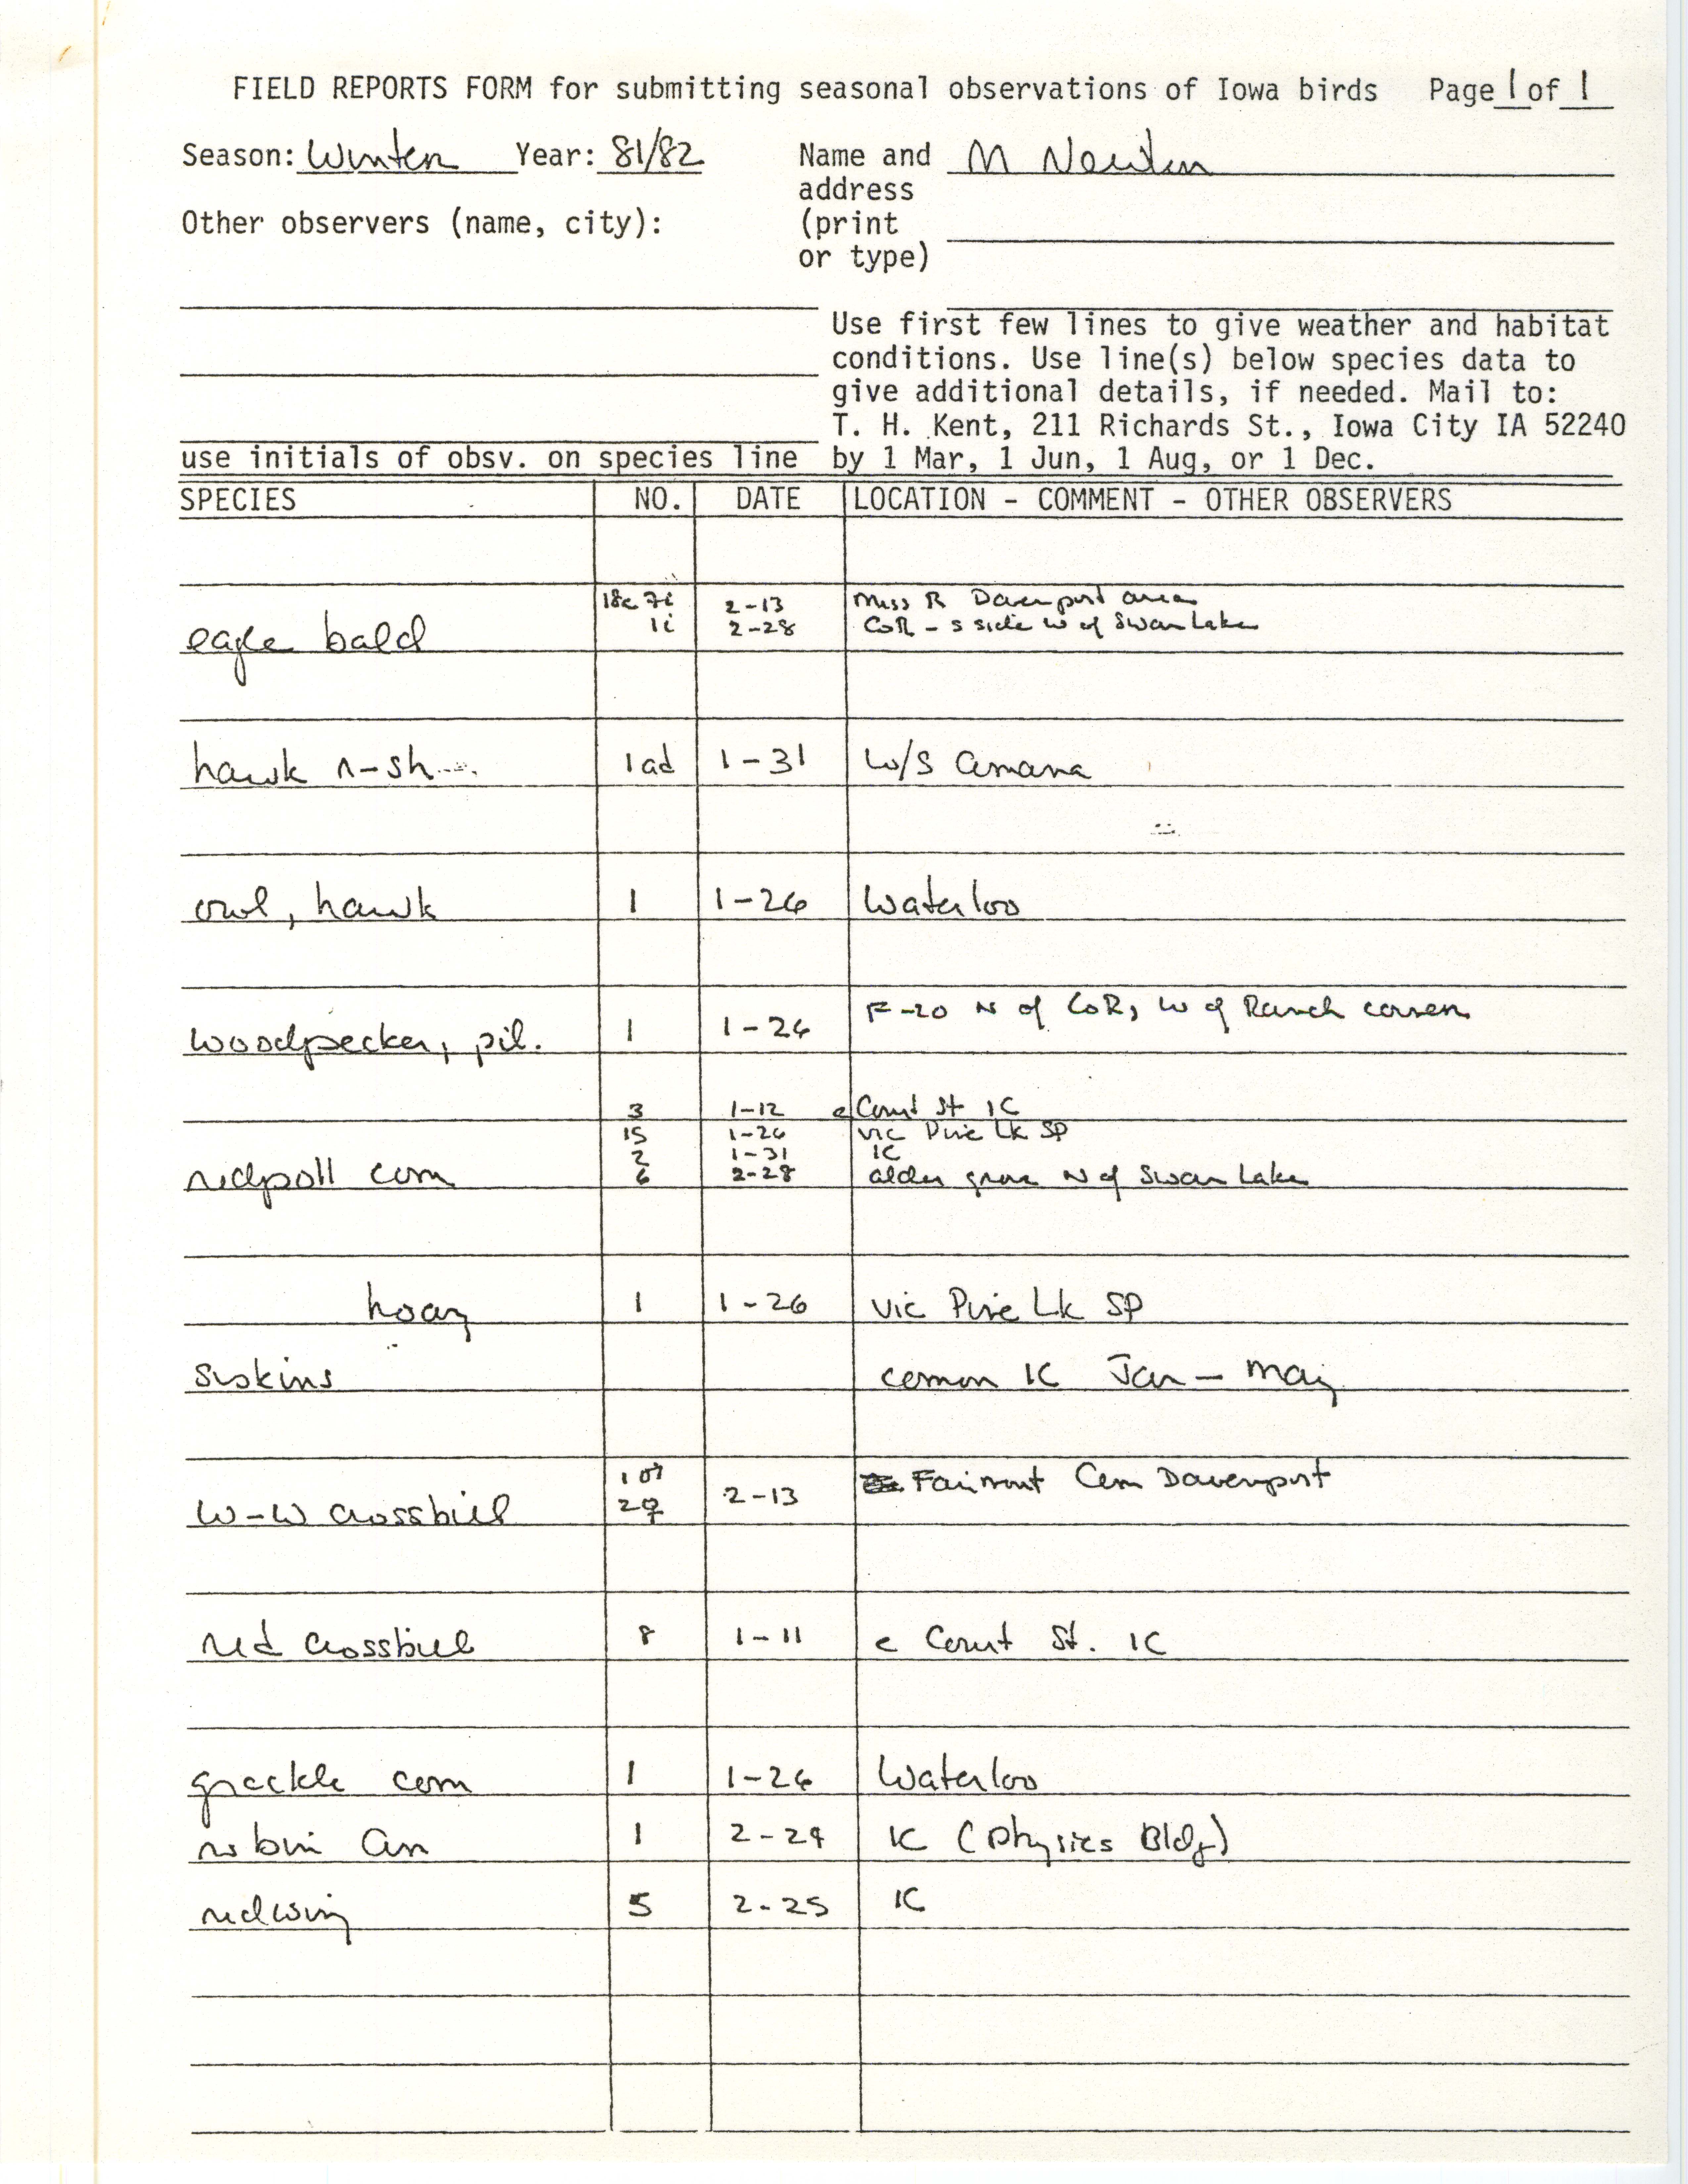 Field notes contributed by Michael C. Newlon, winter 1981-1982